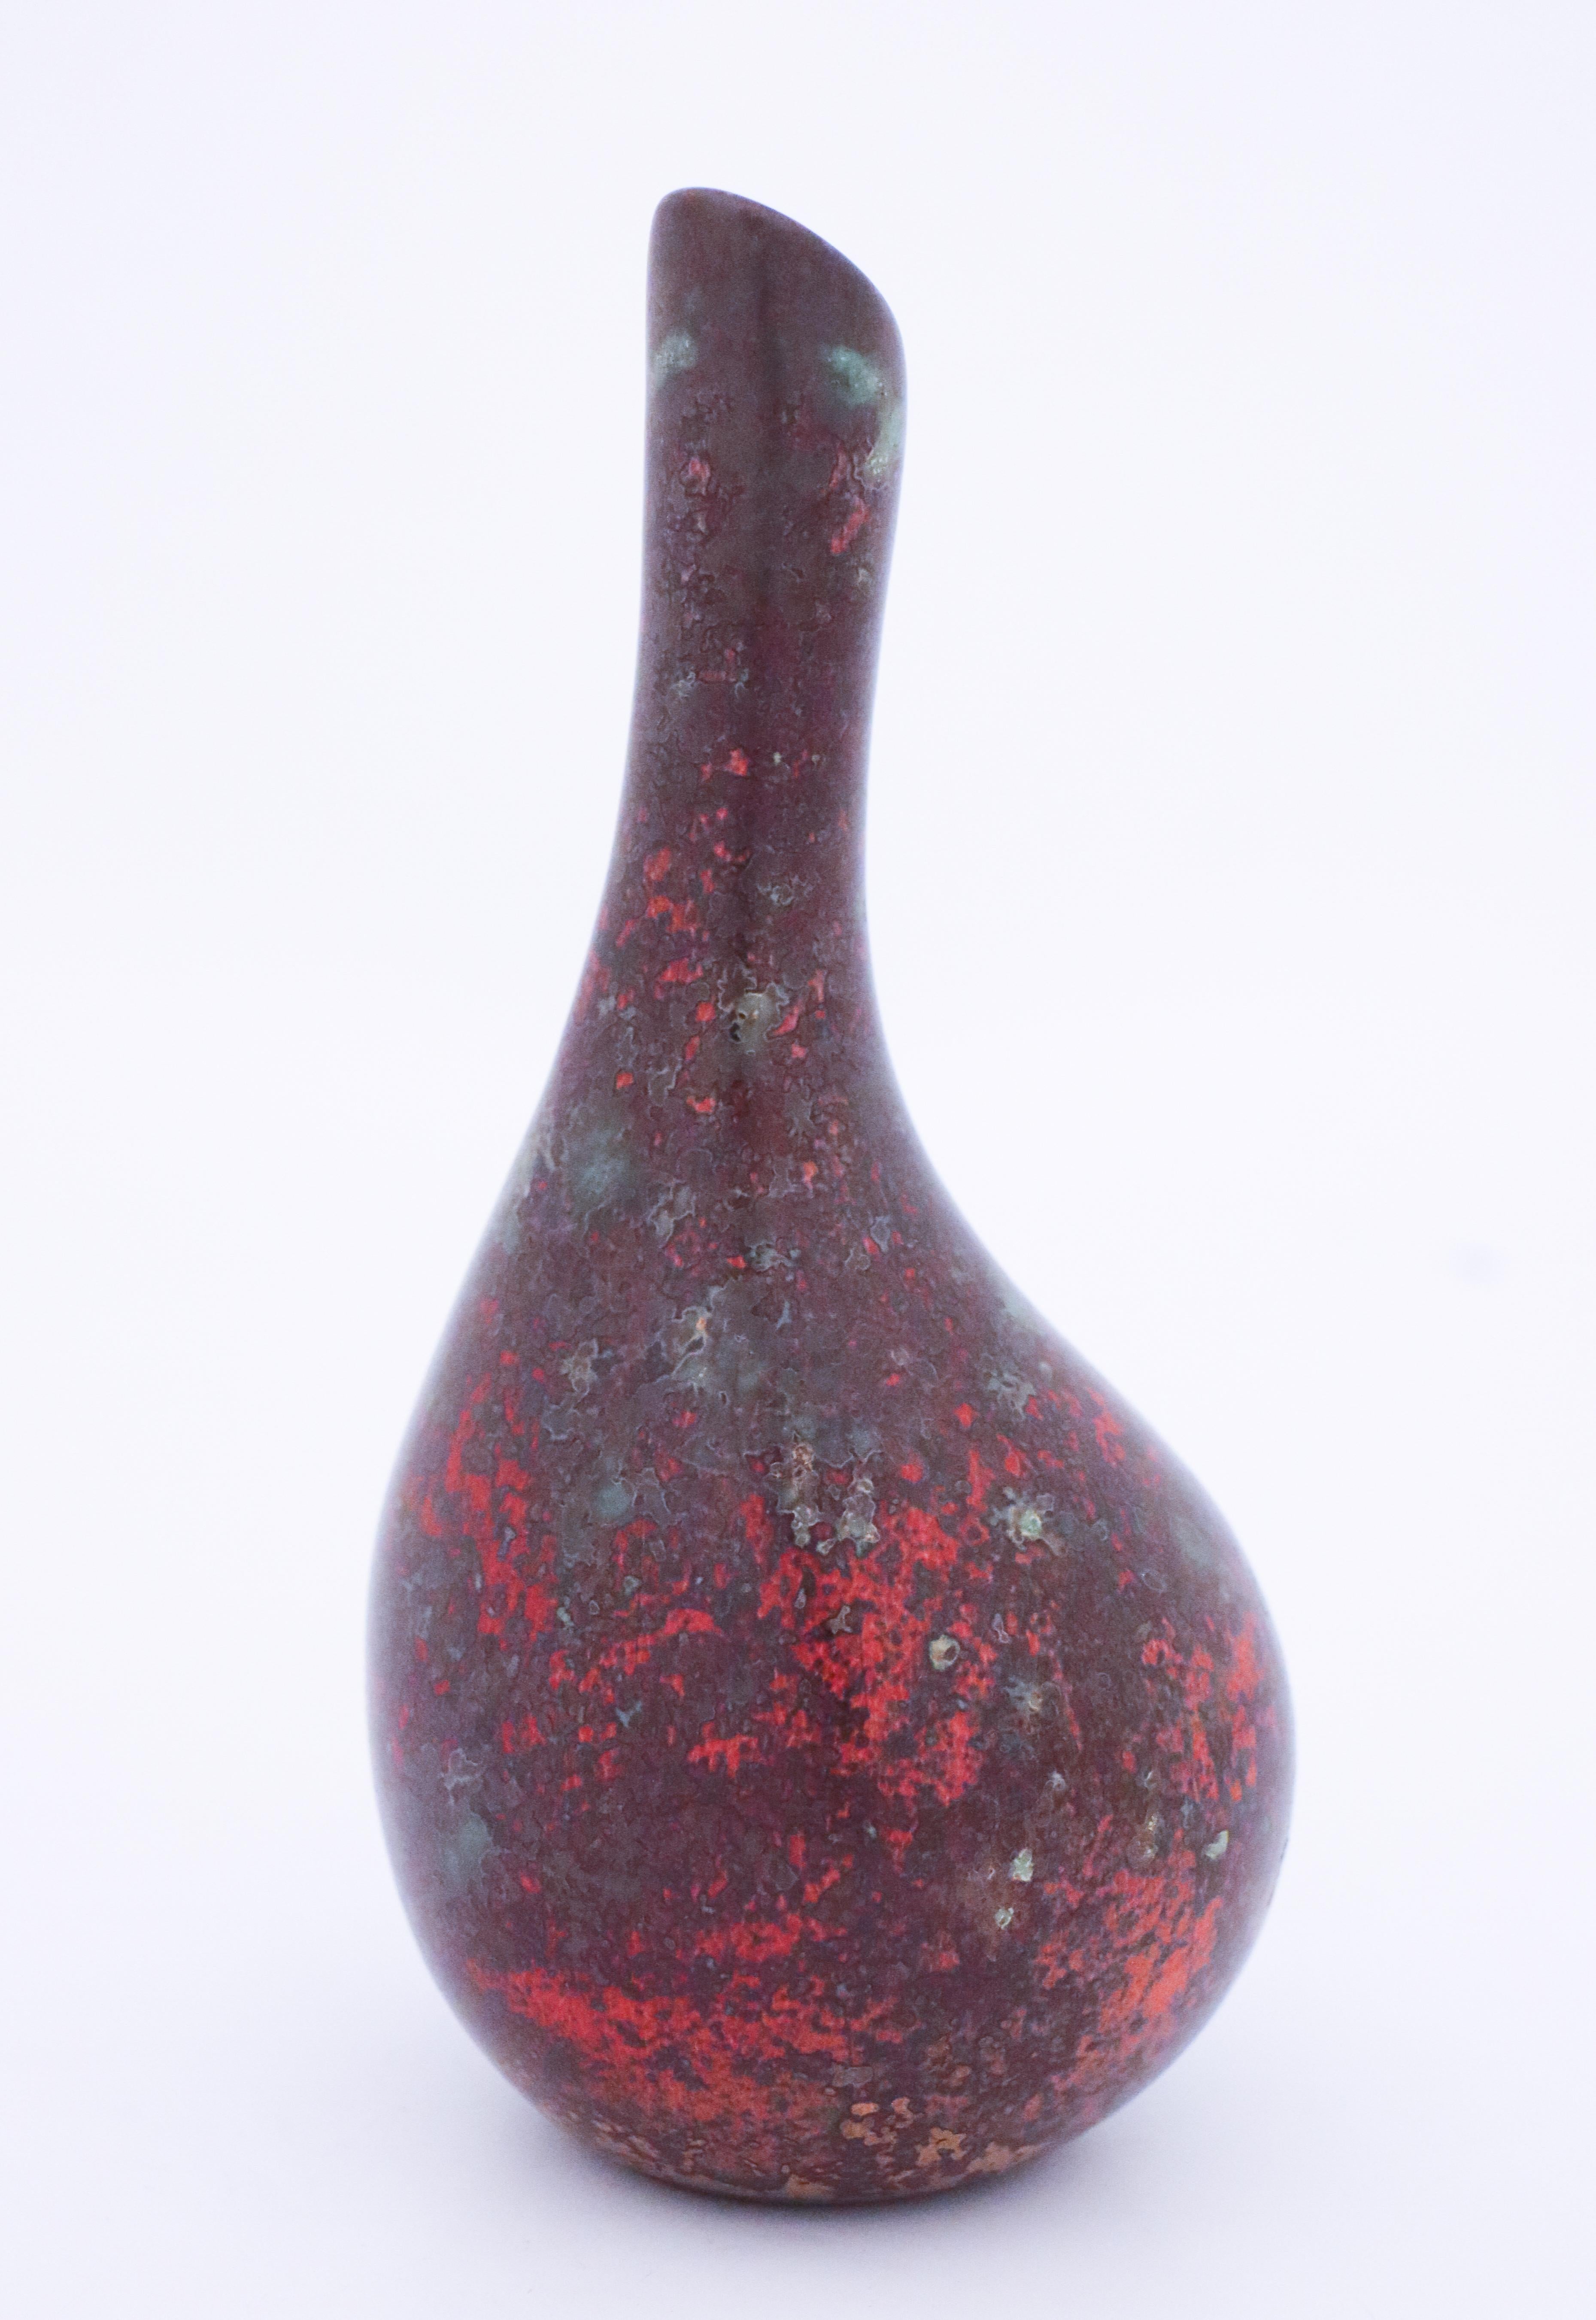 A red vase designed by Hans Hedberg in his studio in Biot. The vase is 18 cm high and in very good condition except from some minor marks and scratches. 

Hans Hedberg (1917-2007) Swedish ceramist who had his studio in Biot, near Nice in